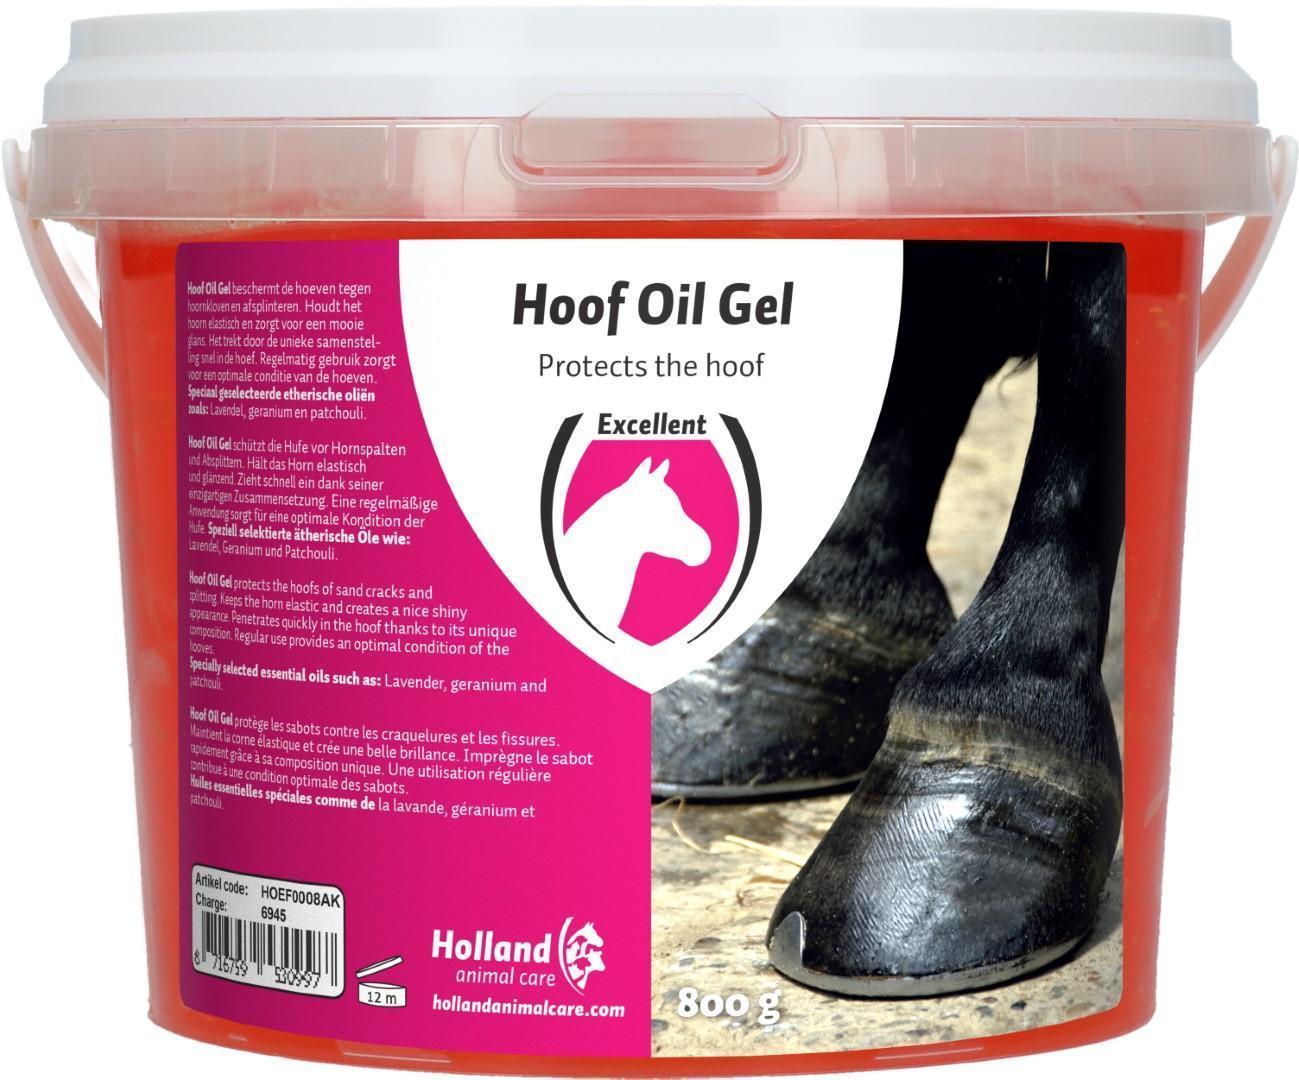 Oil jelly, horse care, hoof care